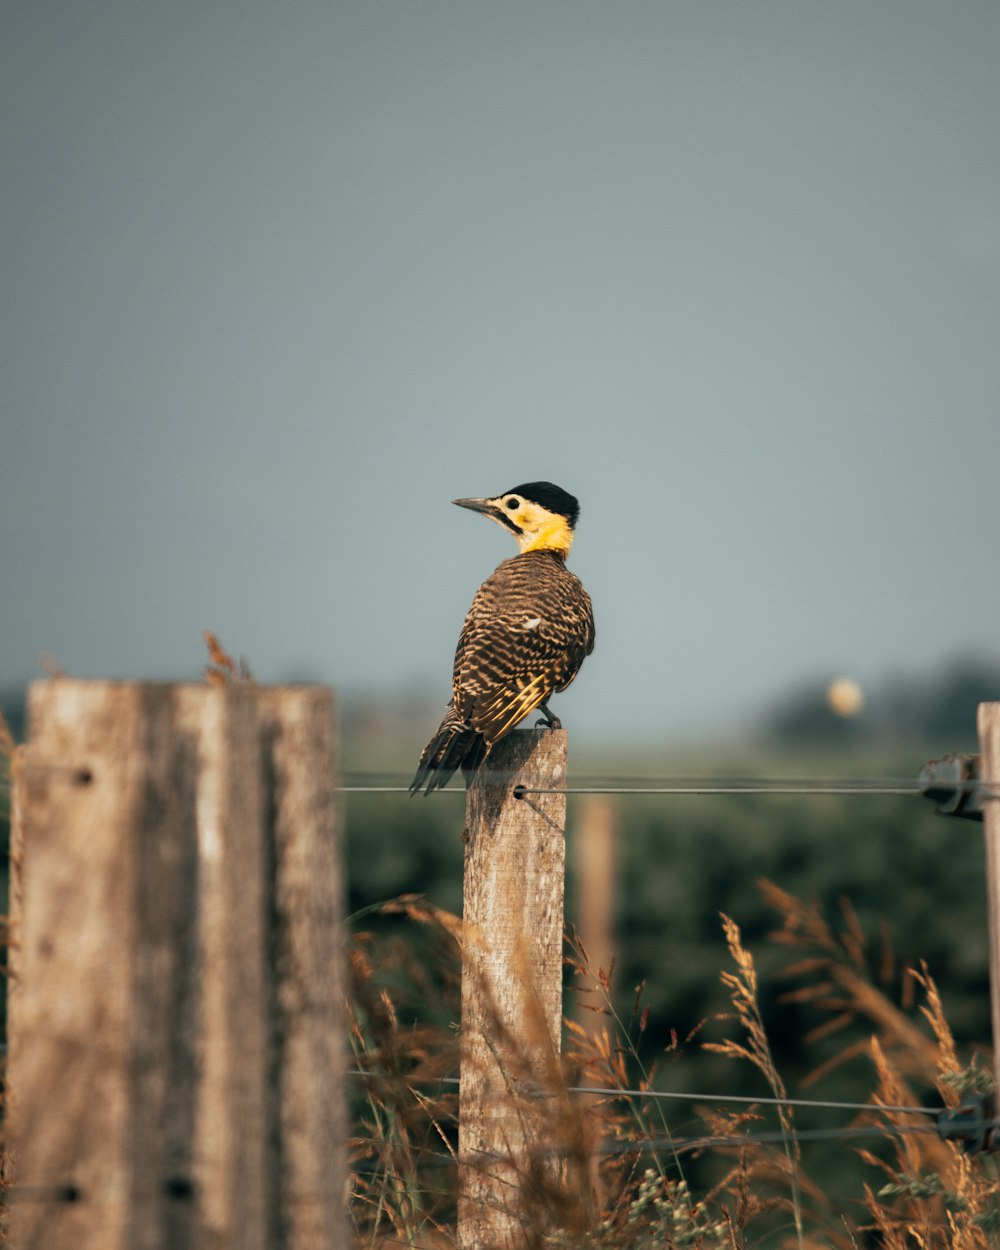 brown and yellow bird on brown wooden fence during daytime